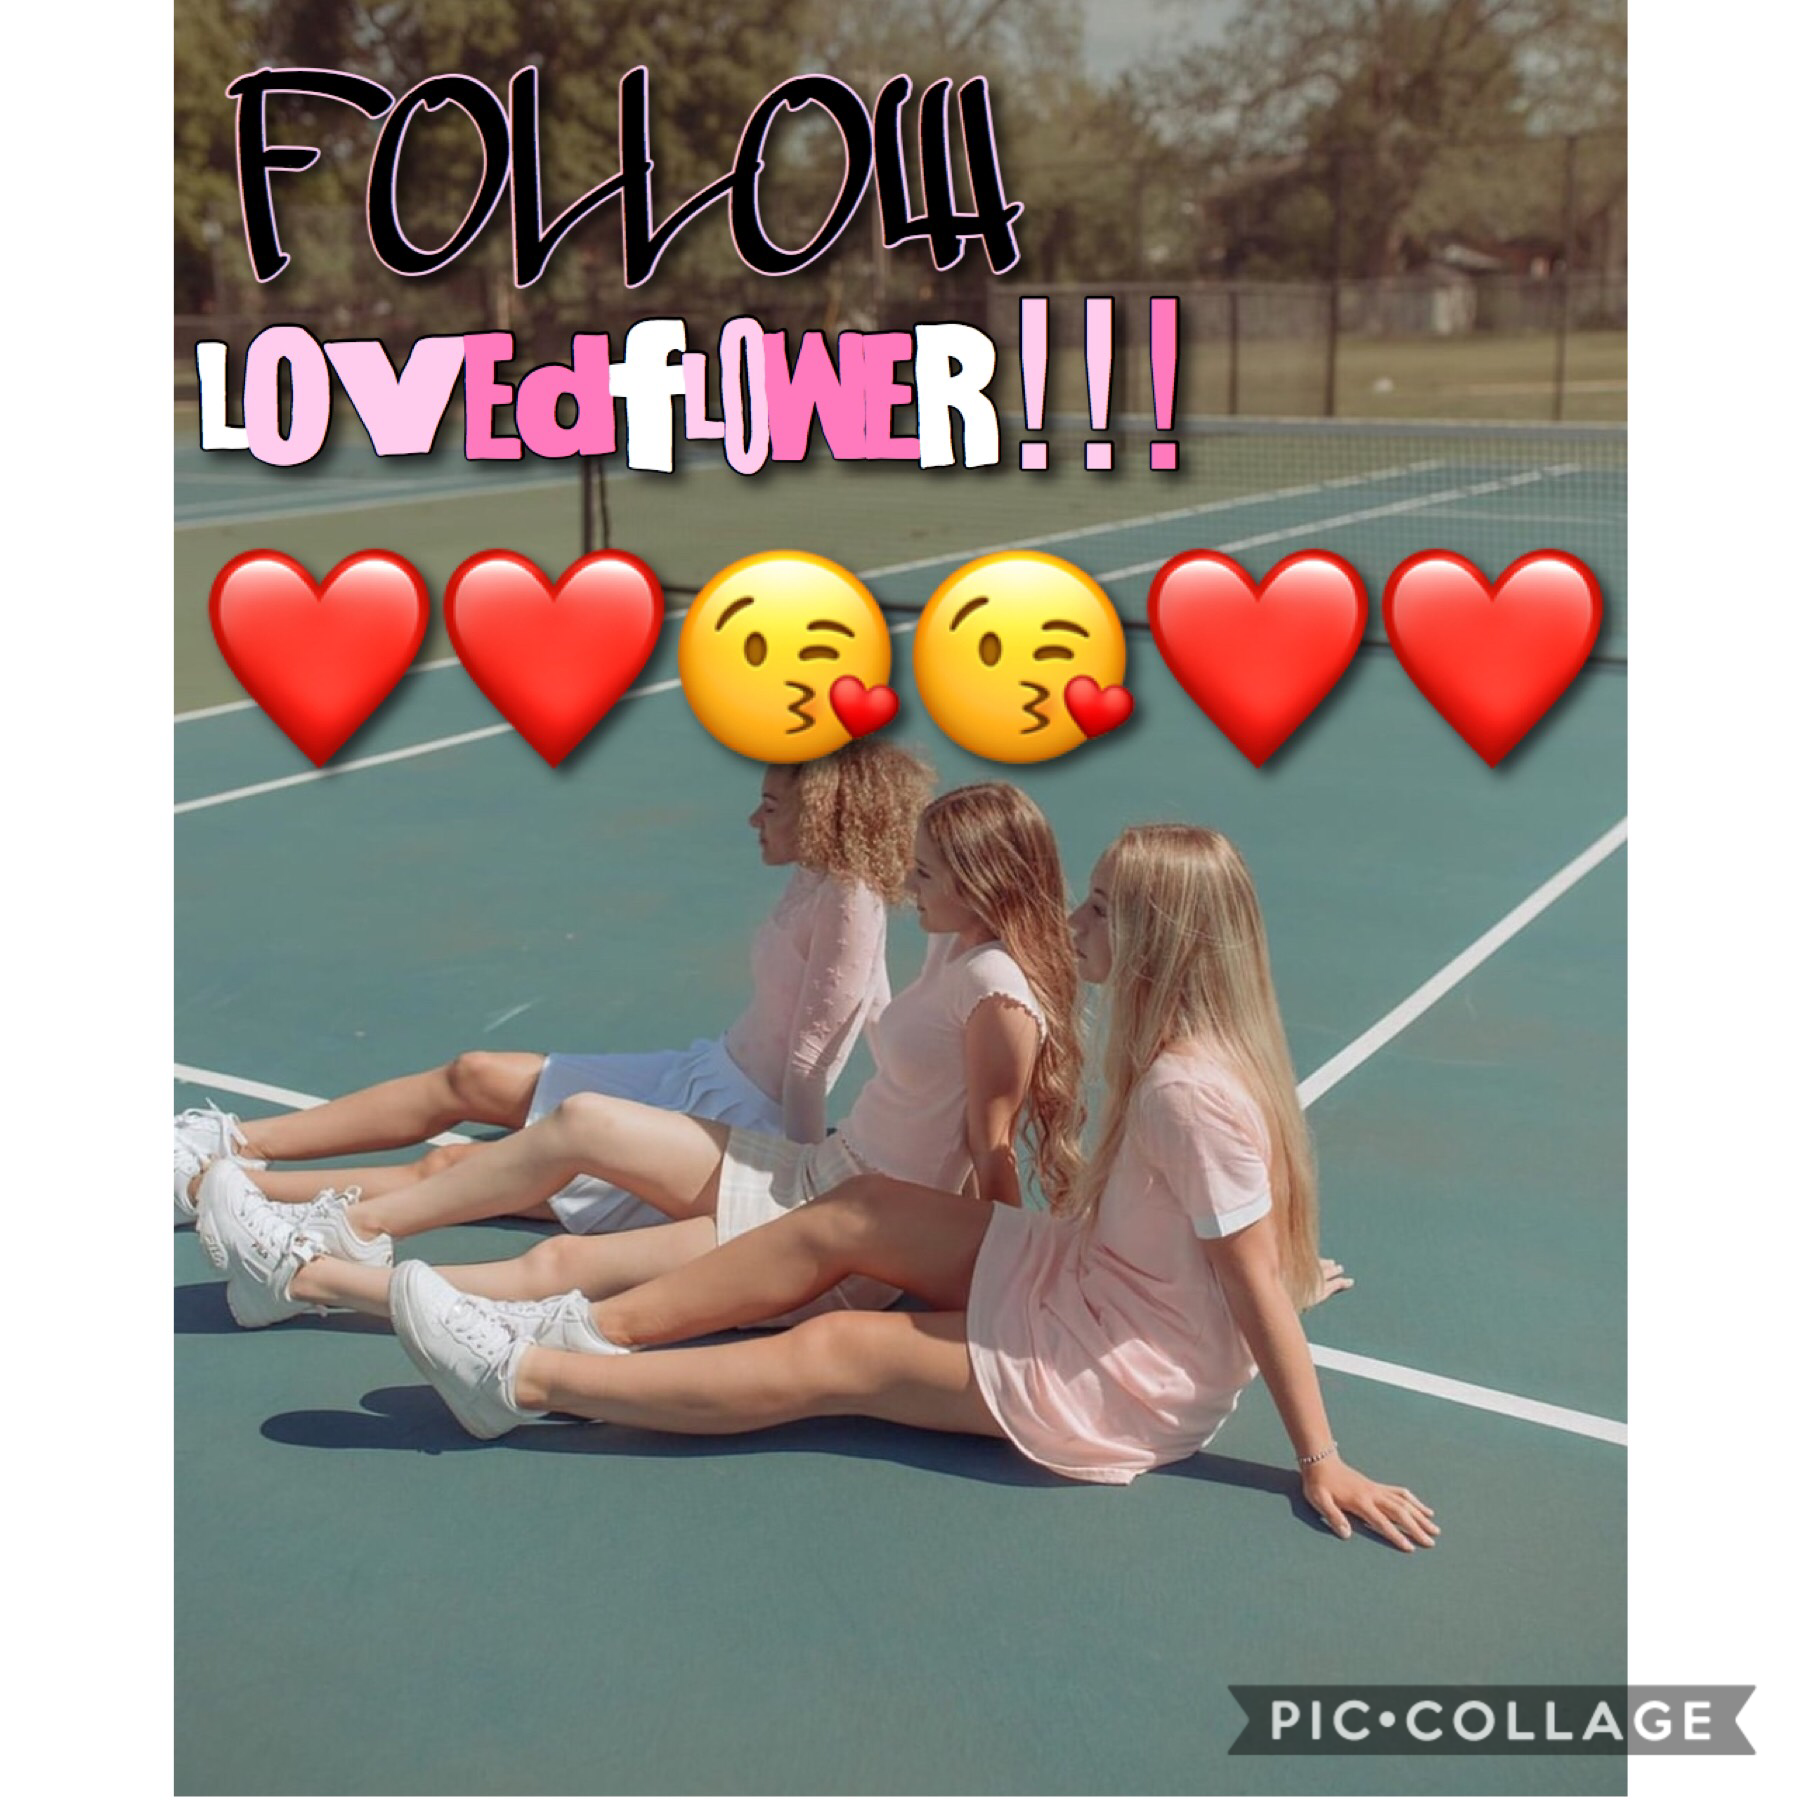 FOLLOW MY BESTAYYYY L0VEDFLOWER HER EDITS ARE SO CUTE BEAUTIFUL AND JUST HONESTLY AMAZING!!❤️❤️😱😱😘😘❤️❤️ SHES SO TALENTED ITS UNBELEIEVABLE!! LIKE SHE DESERVES WAAAAAAY MORE FOLLOWERS AND FANPAGES AND FEATURES